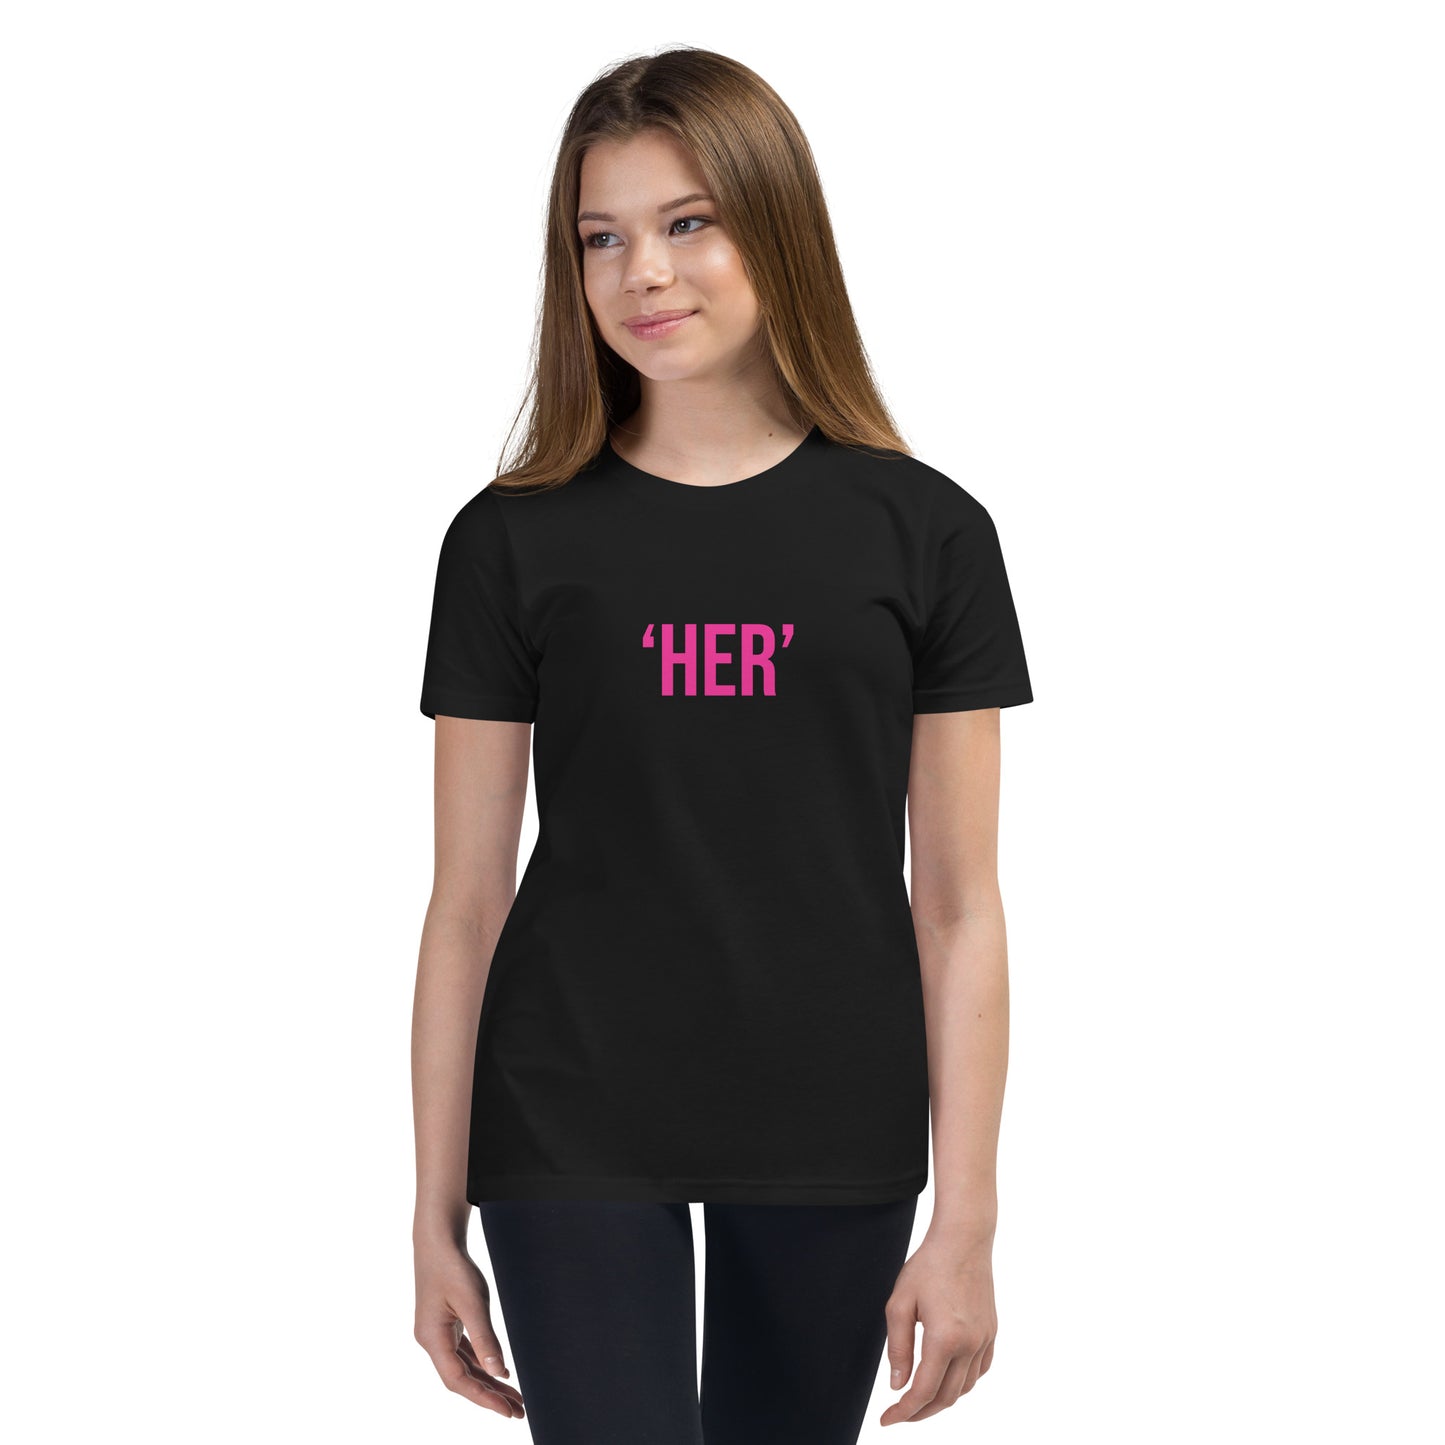 Her Youth Short Sleeve T-Shirt - Perfect Fit for kids